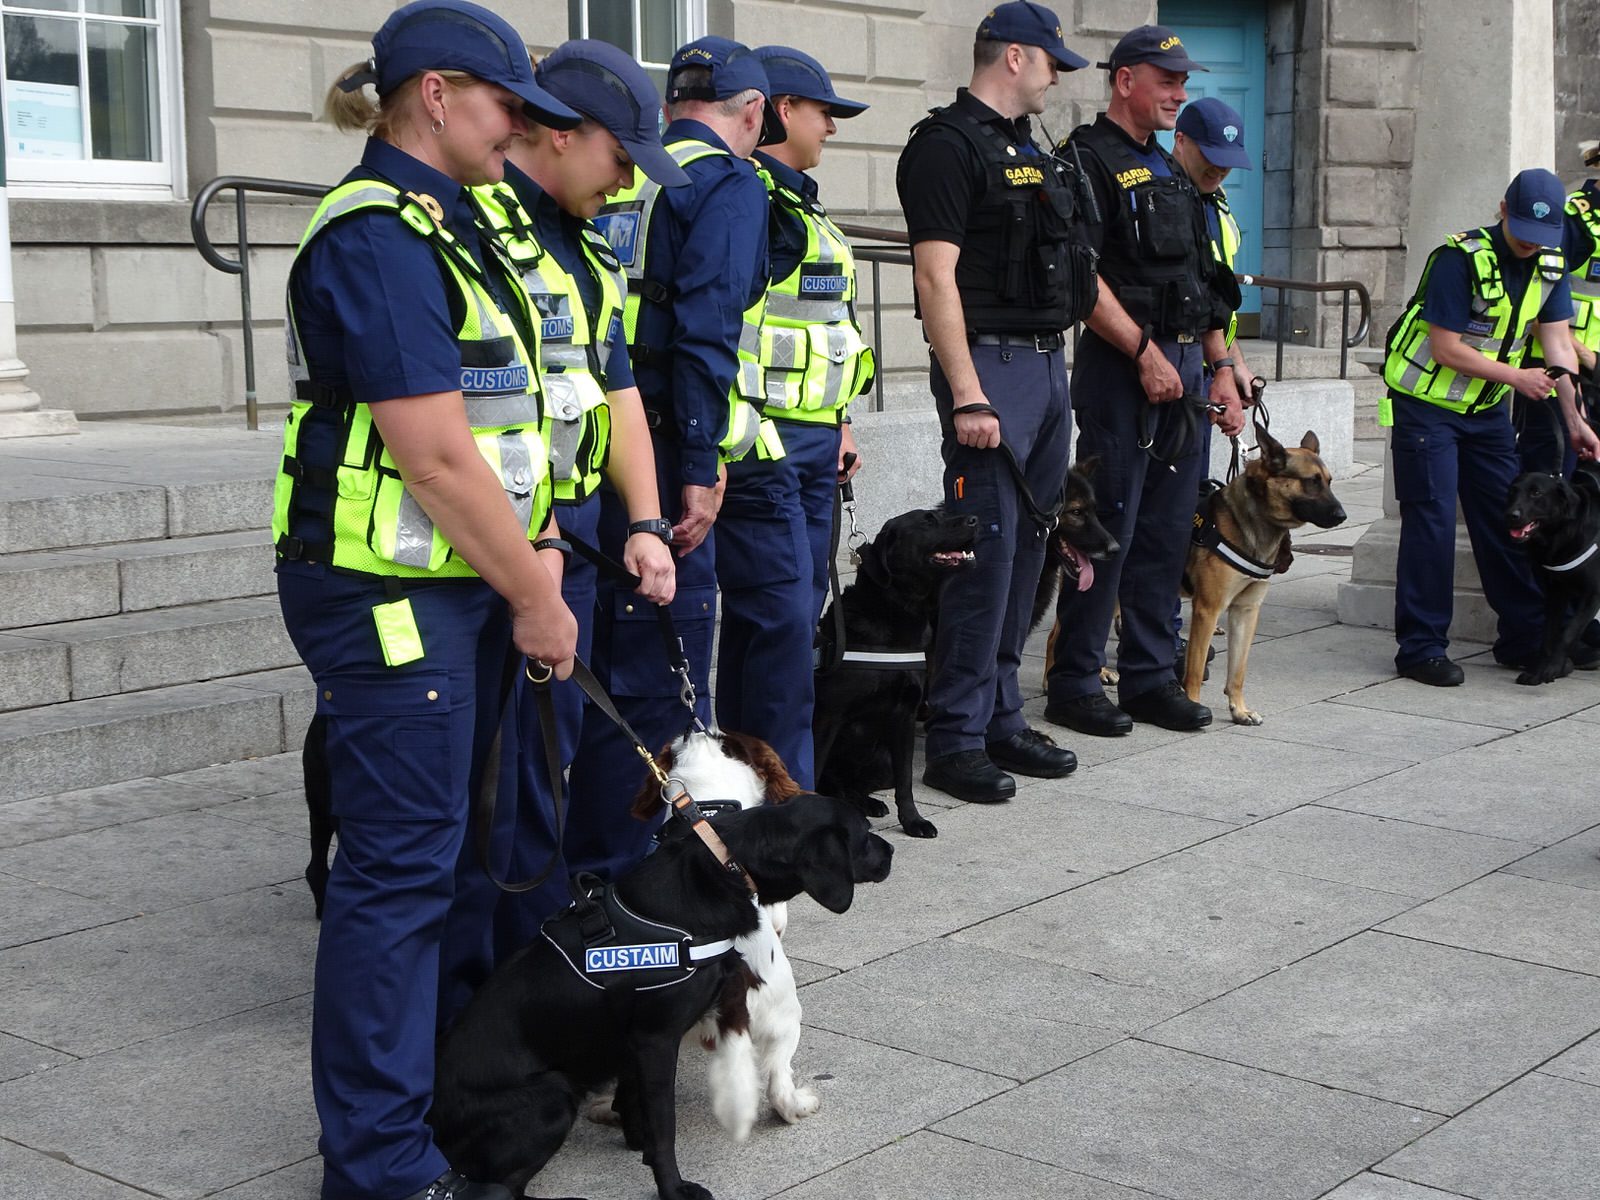 THE DOGS WHO WORK FOR THE IRISH CUSTOMS SERVICE [INVITED THE PRESS TO A PHOTO-SHOOT]-225739-1